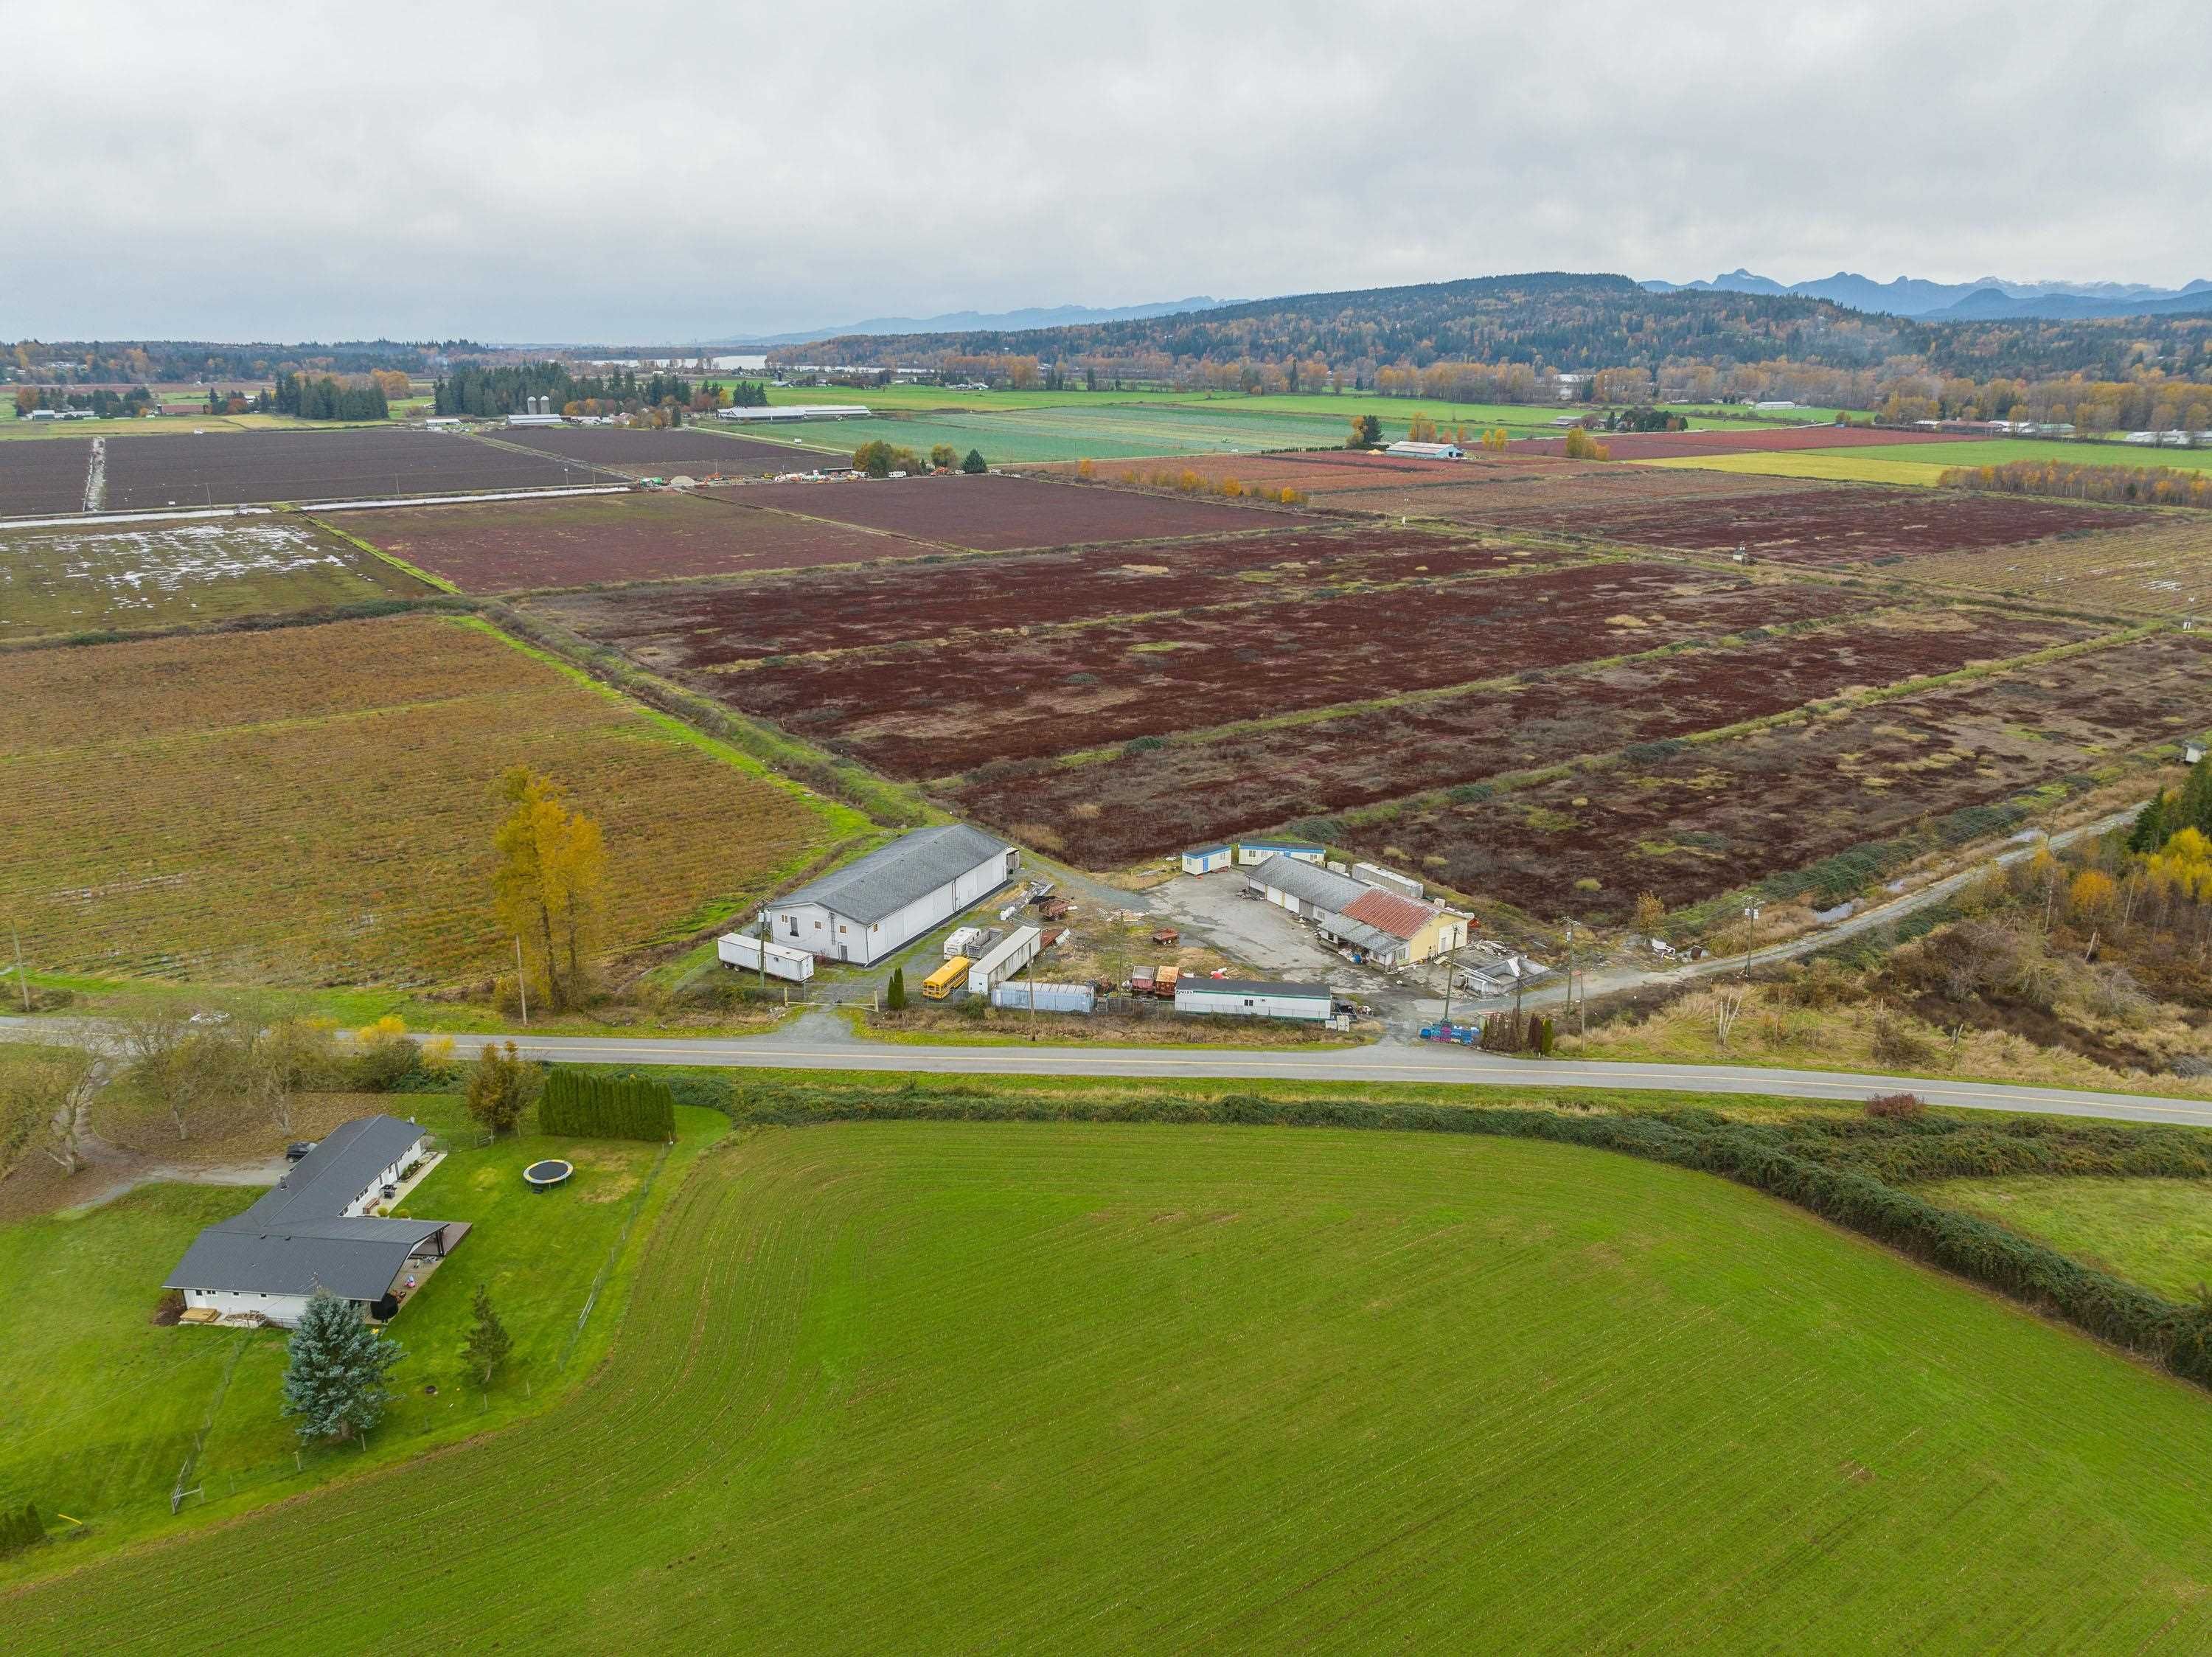 Main Photo: 8201 DYKE Road in Abbotsford: Bradner Agri-Business for sale : MLS®# C8055761